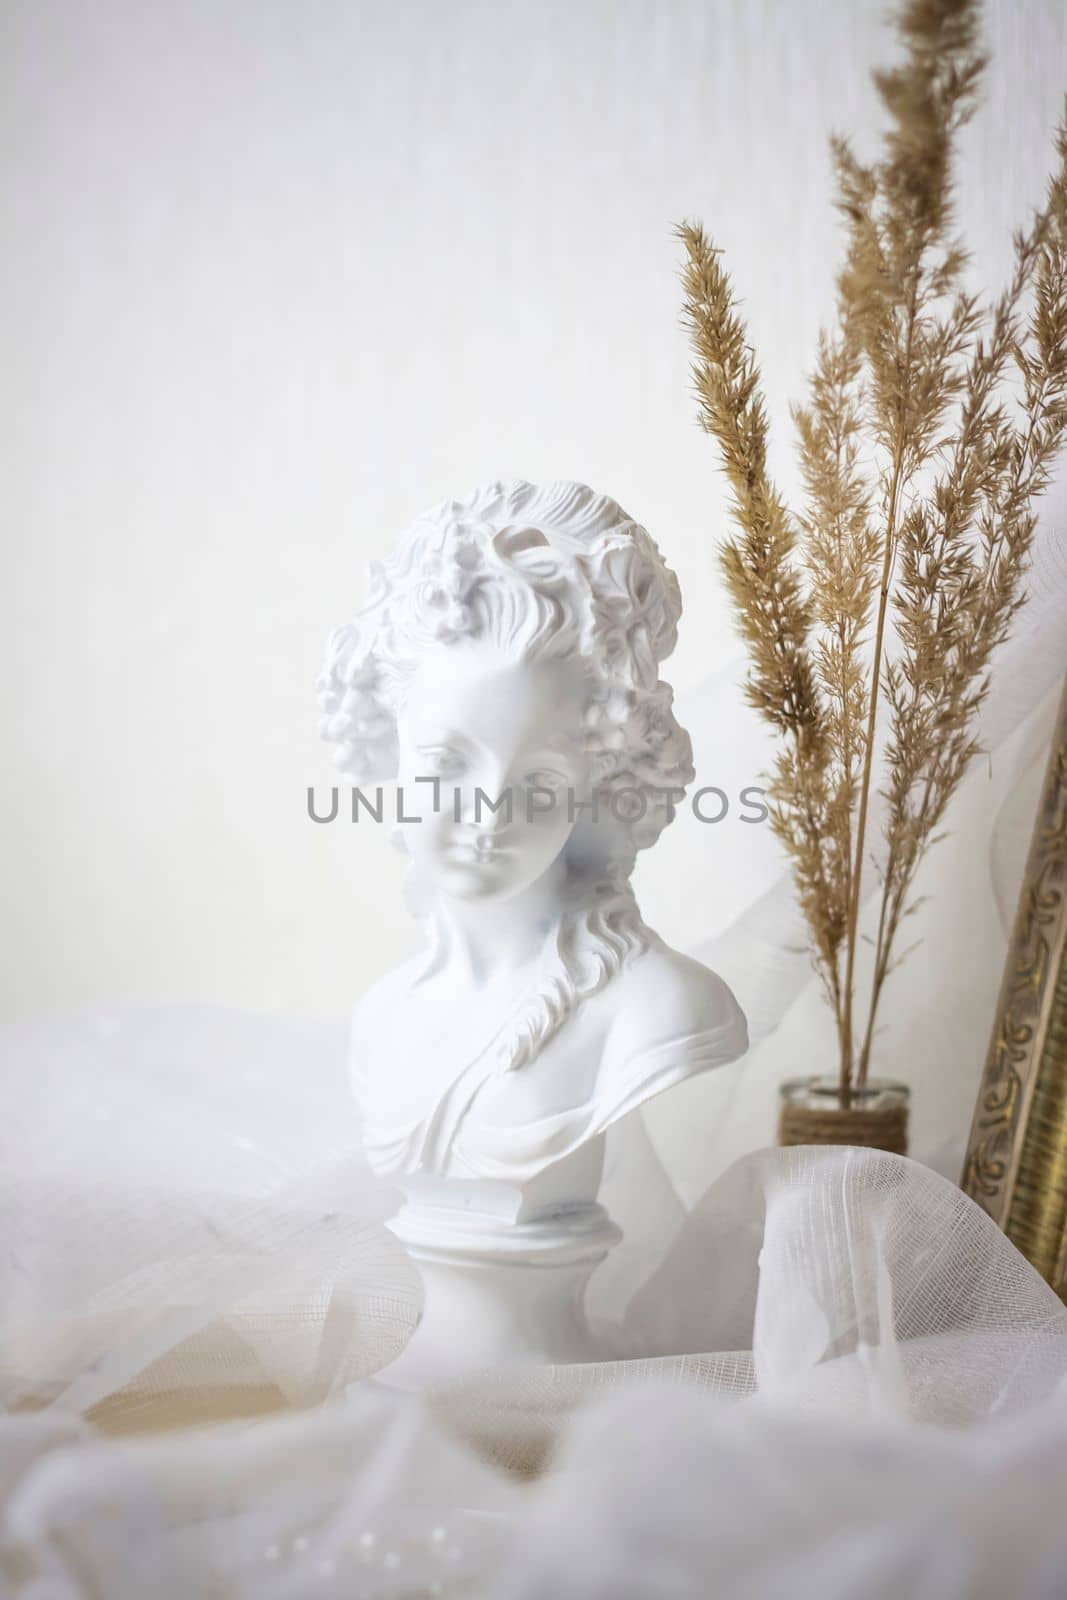 Plaster bust of a girl. Statuette on the background of light fabric and fluffy branches.  Selective focus